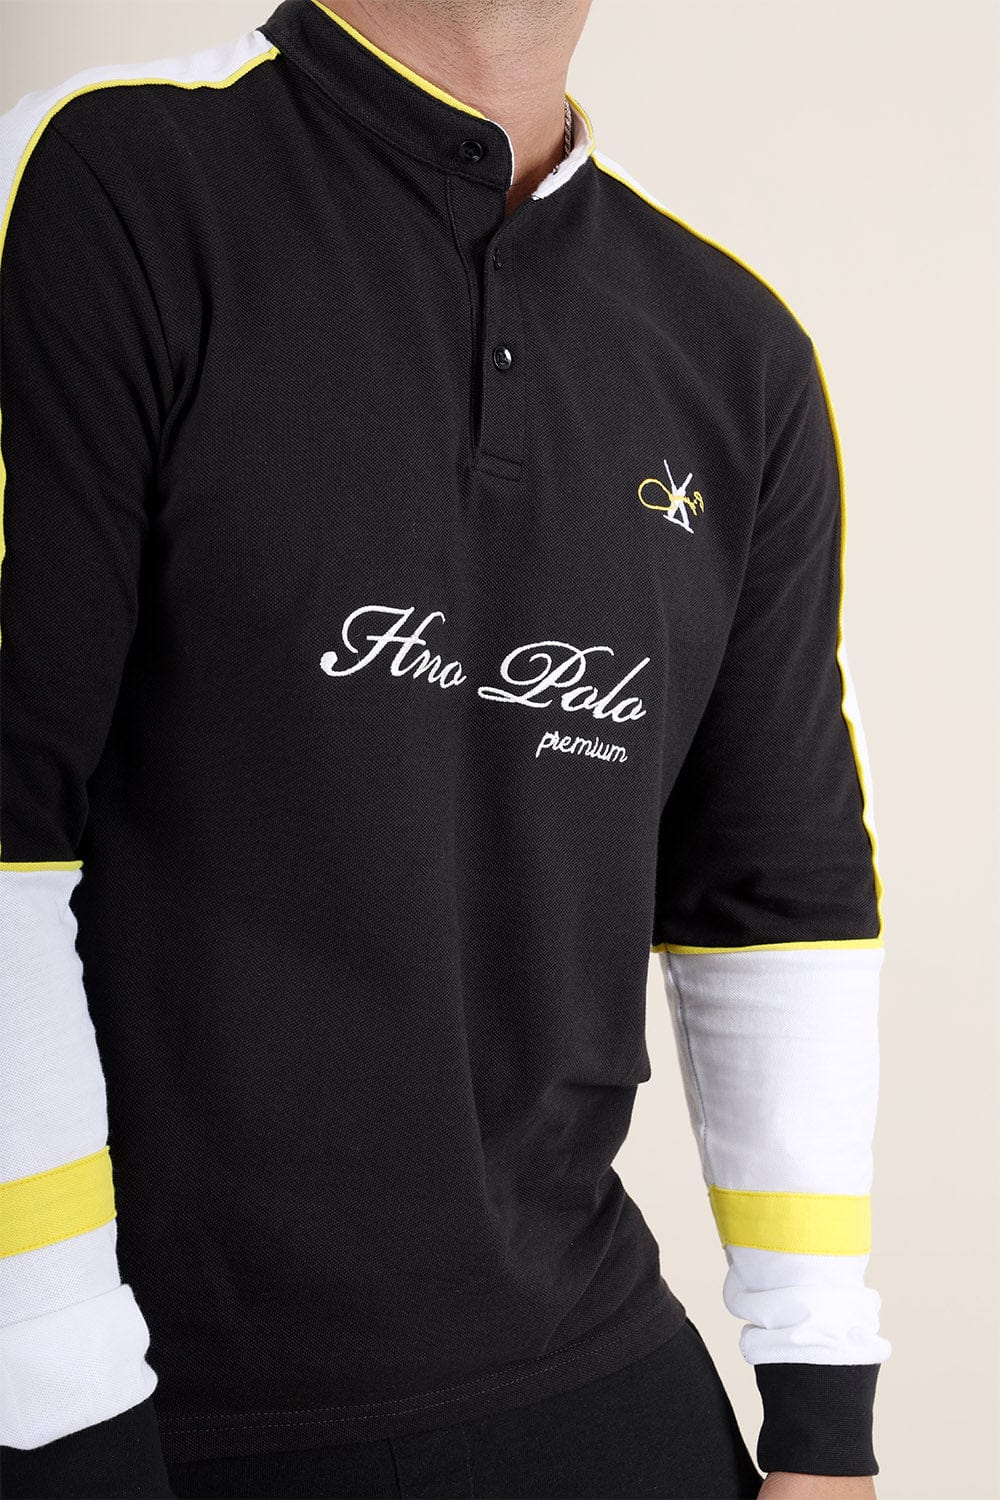 Hope Not Out by Shahid Afridi Men Polo Shirt Premium Embroidered Ban Polo Shirt With Panels